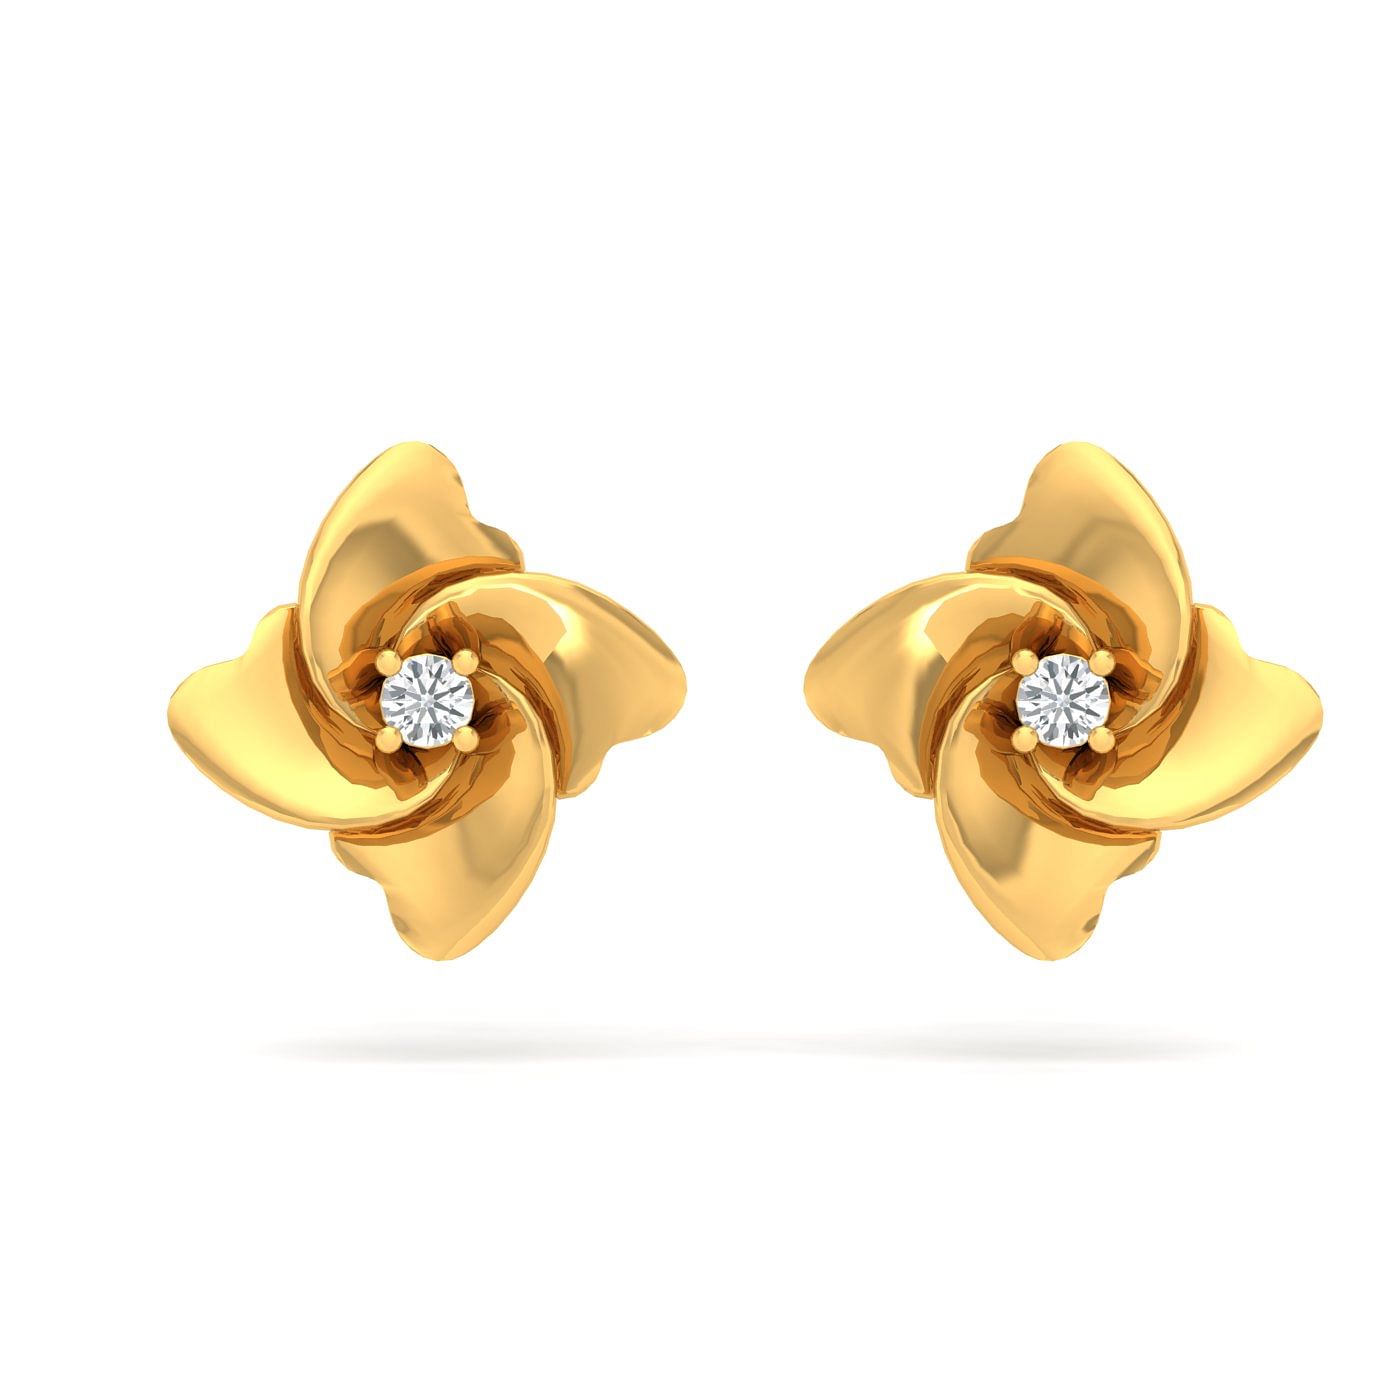 100 White Stone Gold Earring Designs for Men  Women Best Price  Candere  by Kalyan Jewellers